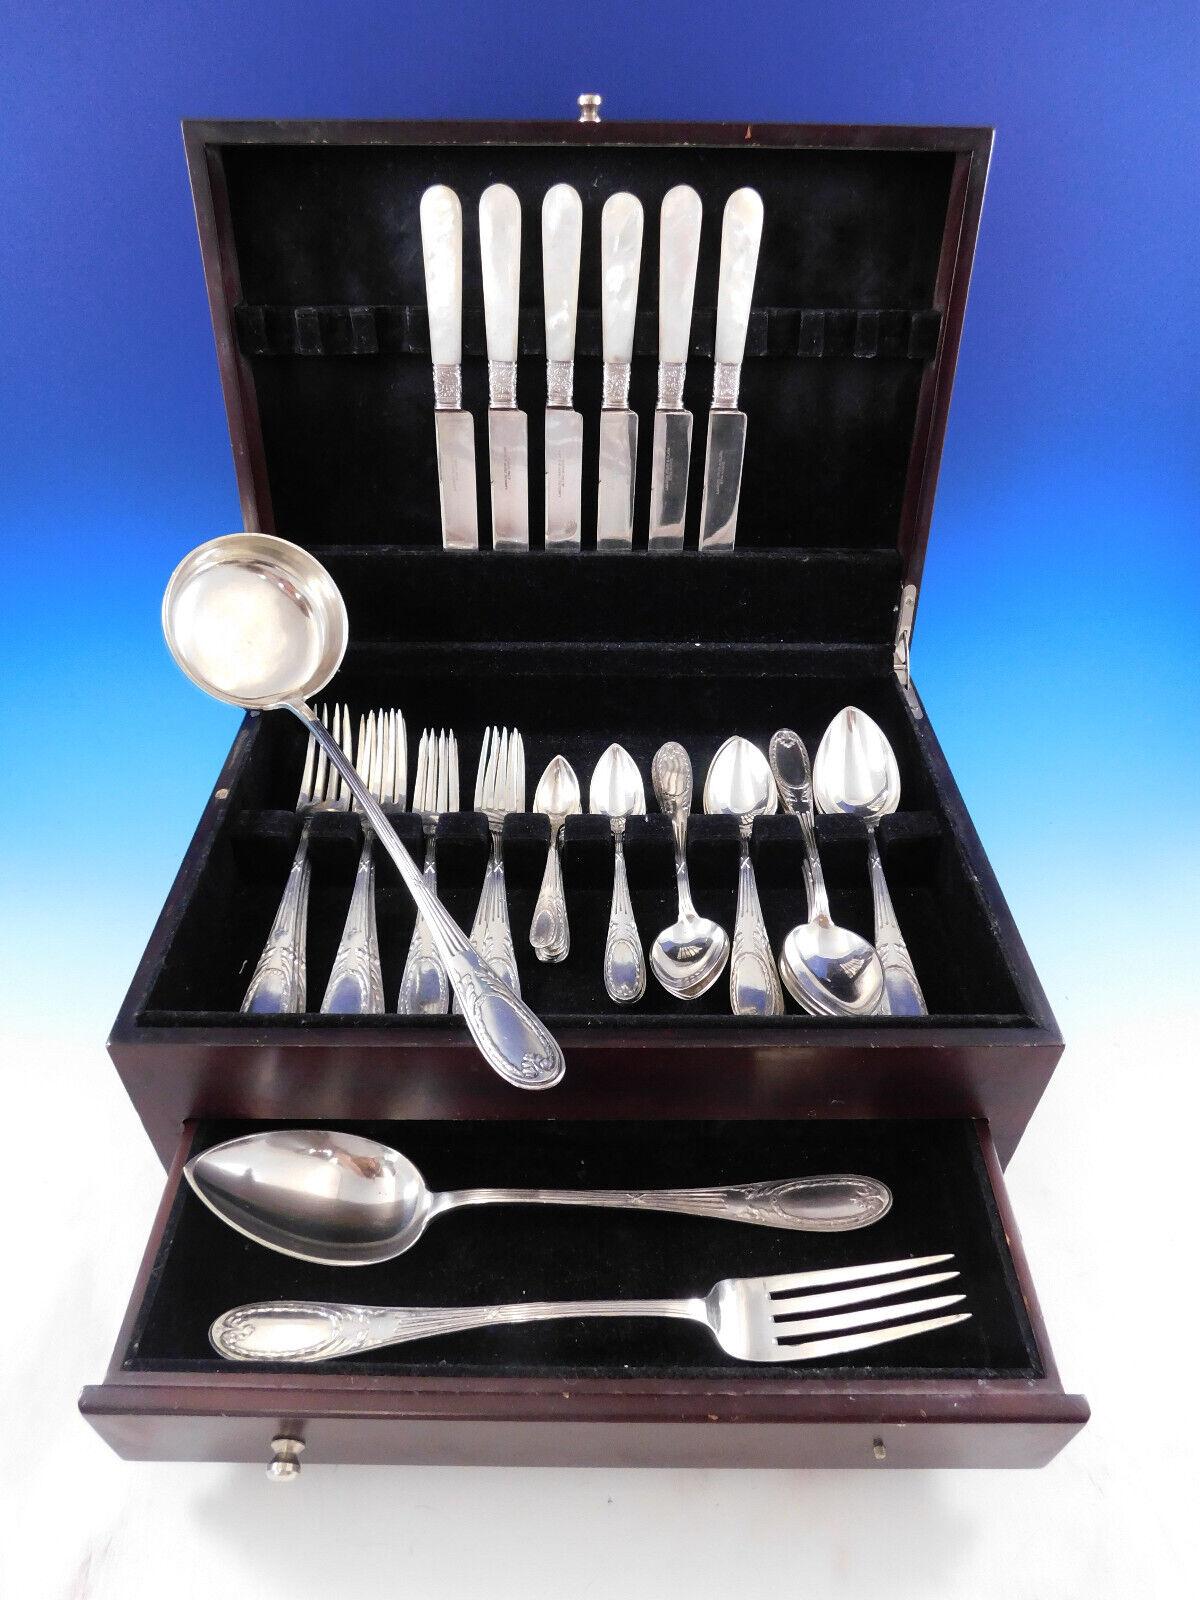 Superb Marie Antoinette by Rojorzelsk Russian 840 silver flatware service - 43 pieces total (including Mother of Pearl handle knives). This set includes:

6 Knives, Mother of Pearl Handle (not Russian) 8 1/2